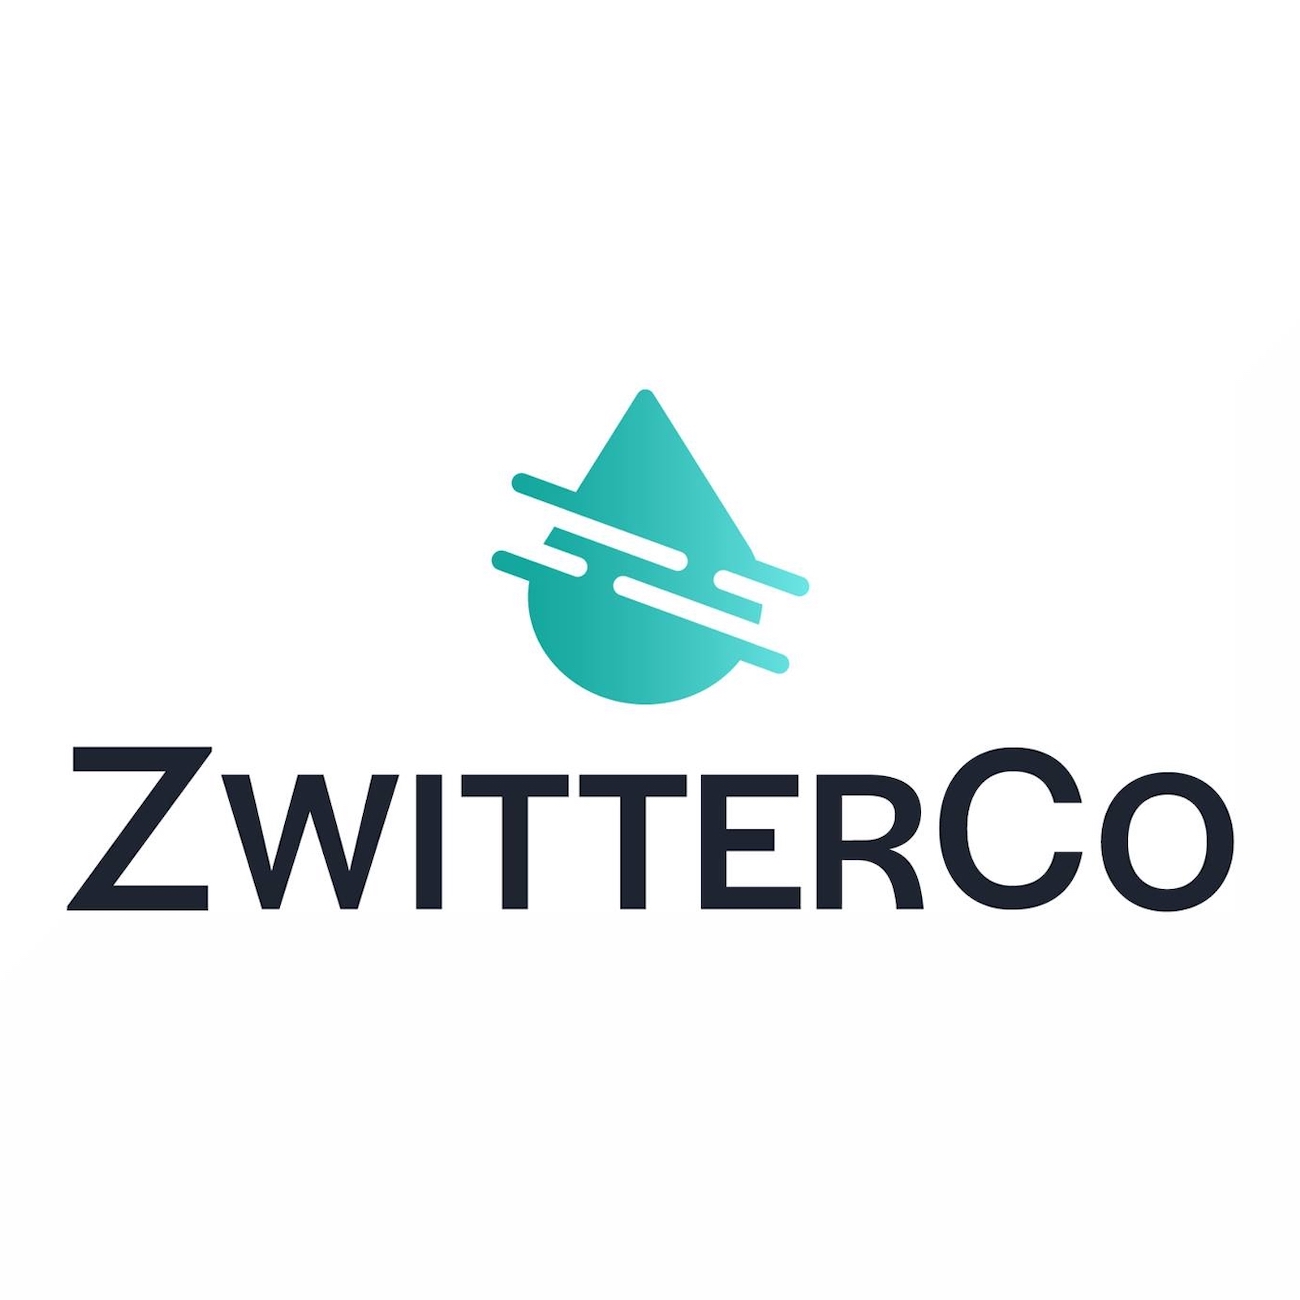 Membrane Technology Company ZwitterCo Secures $33 Million